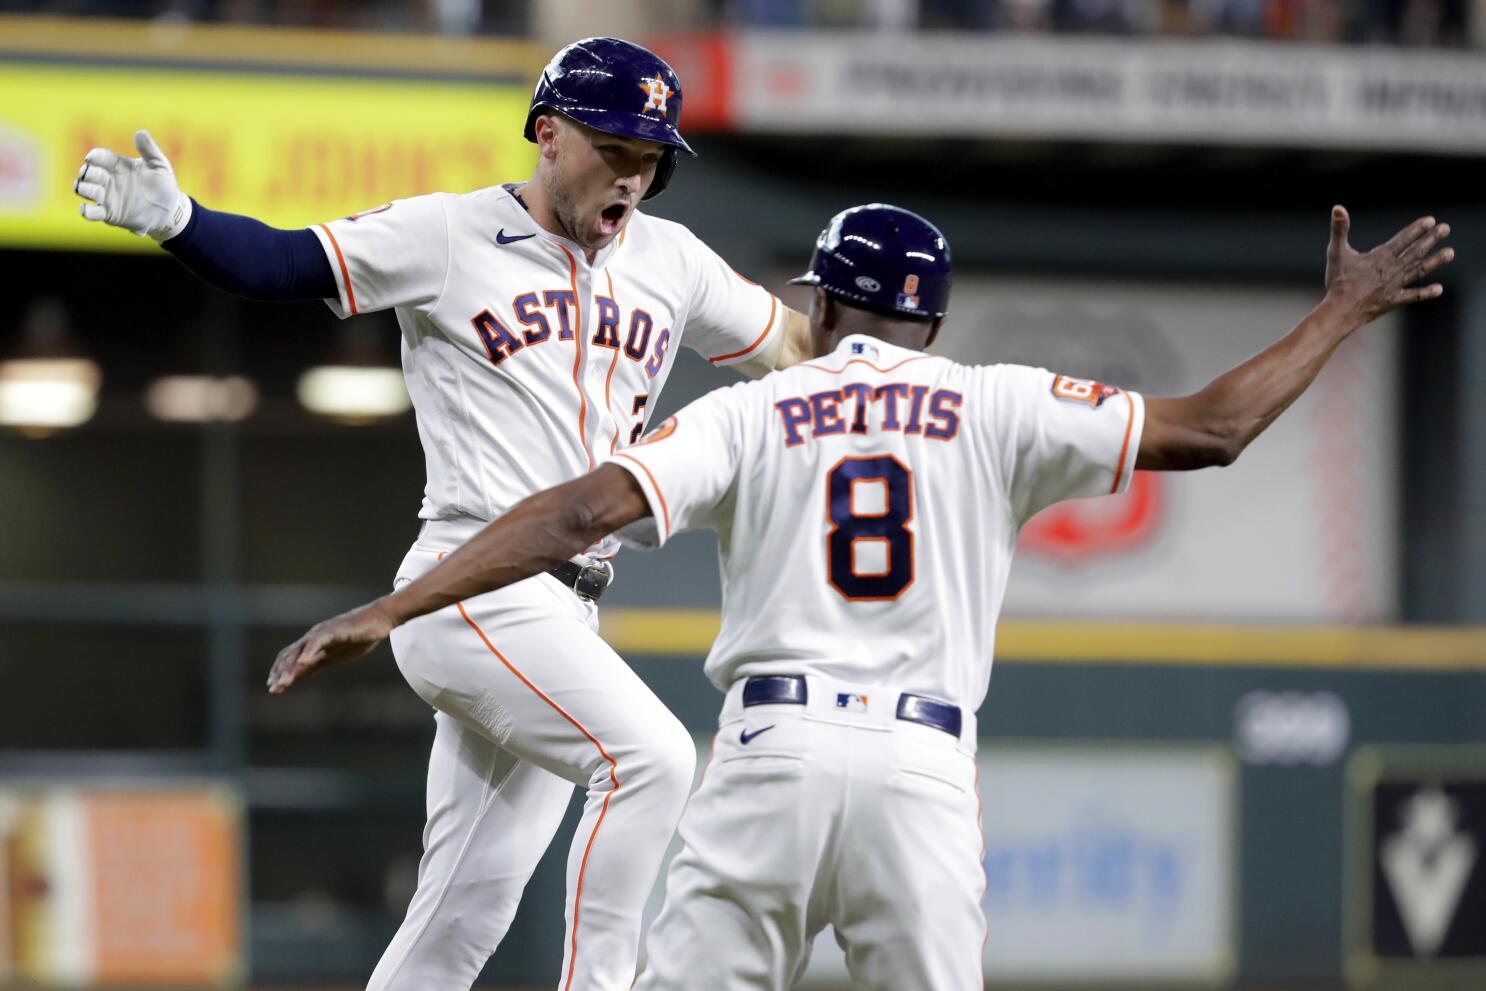 Photos: Mariners swept by Astros with 3-2 loss